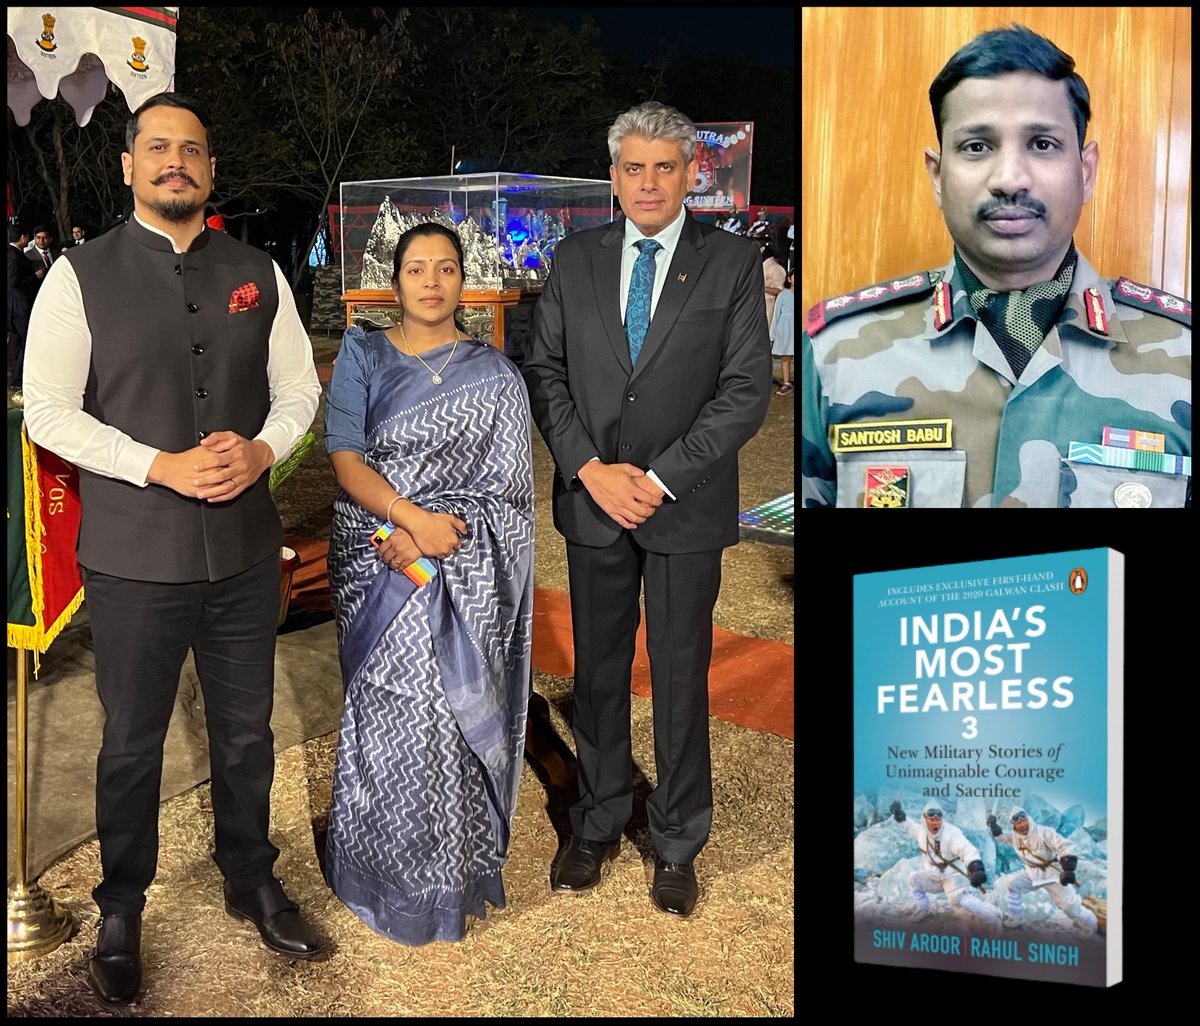 Huge honour to meet Mrs Santoshi, wife of Col Santosh Babu, Maha Vir Chakra, who was killed in action leading his unit, the 16 Bihar, in the Galwan Valley on this day 3 years ago against a much larger Chinese attack force. The *only* firsthand account is in #IndiasMostFearless 3.